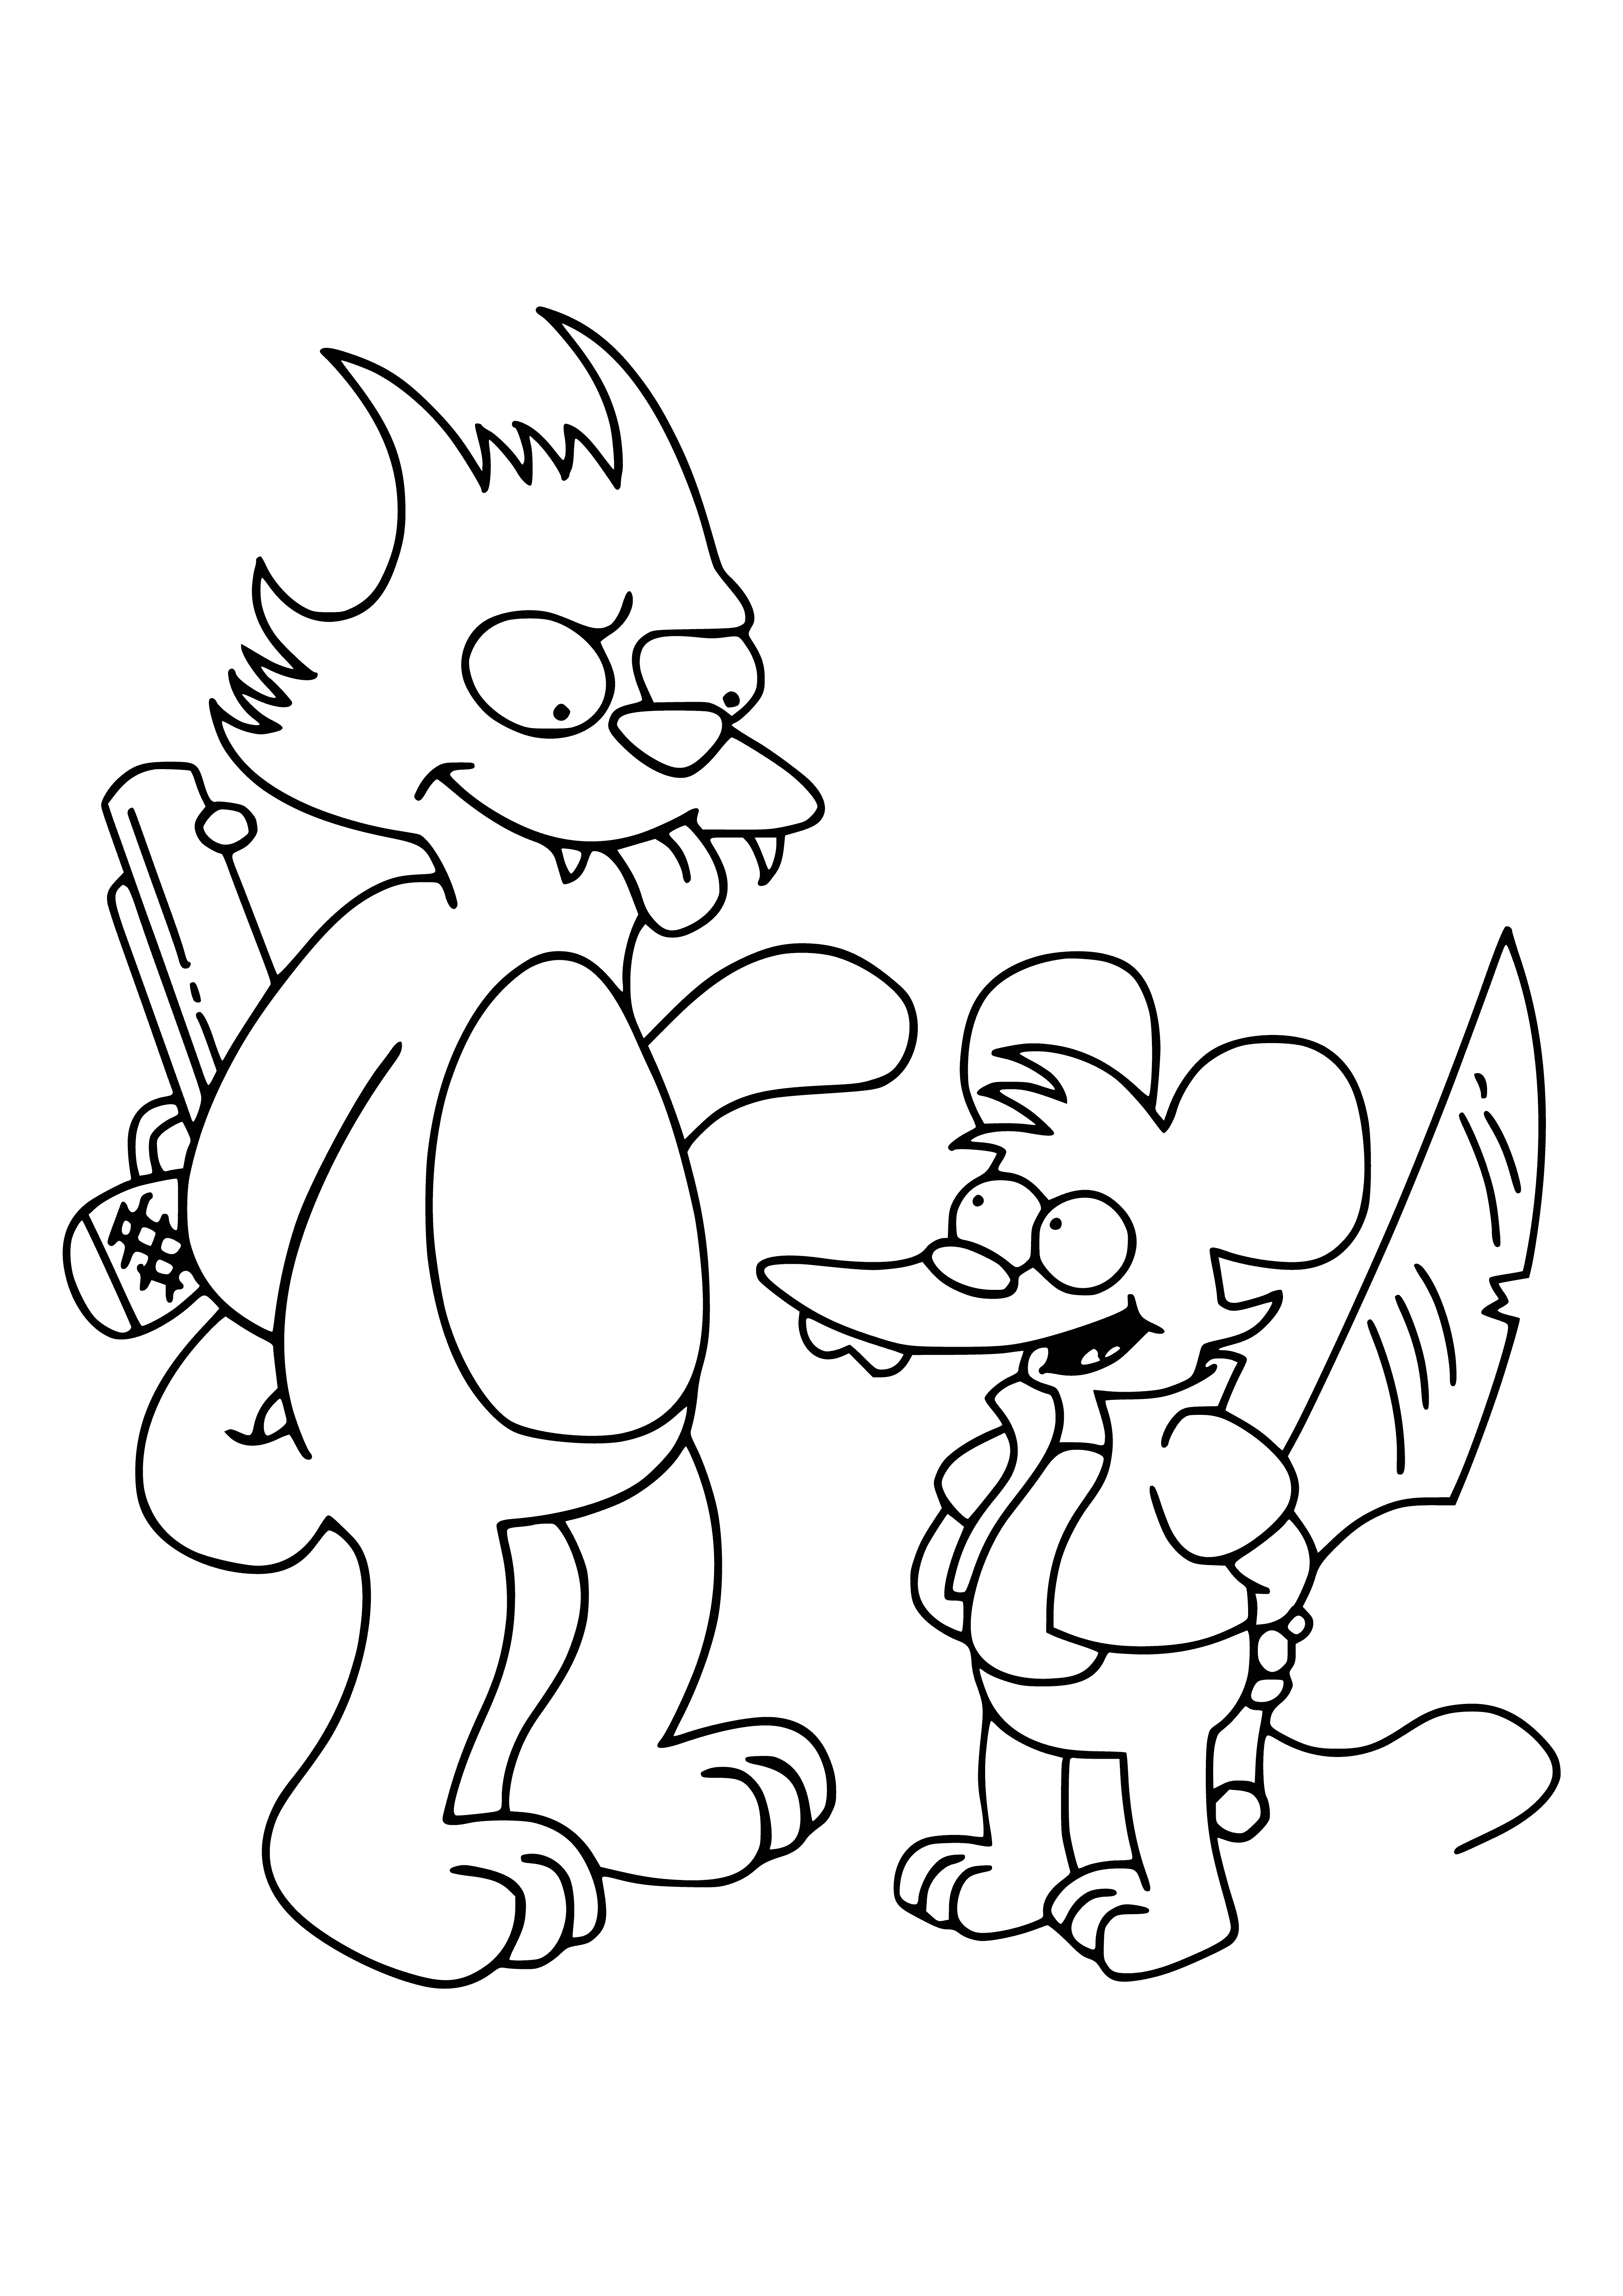 coloring page: The Simpsons family enjoys watching a show with a chimp being tickled in a tree. #TheSimpsons #Tickling #Scratching